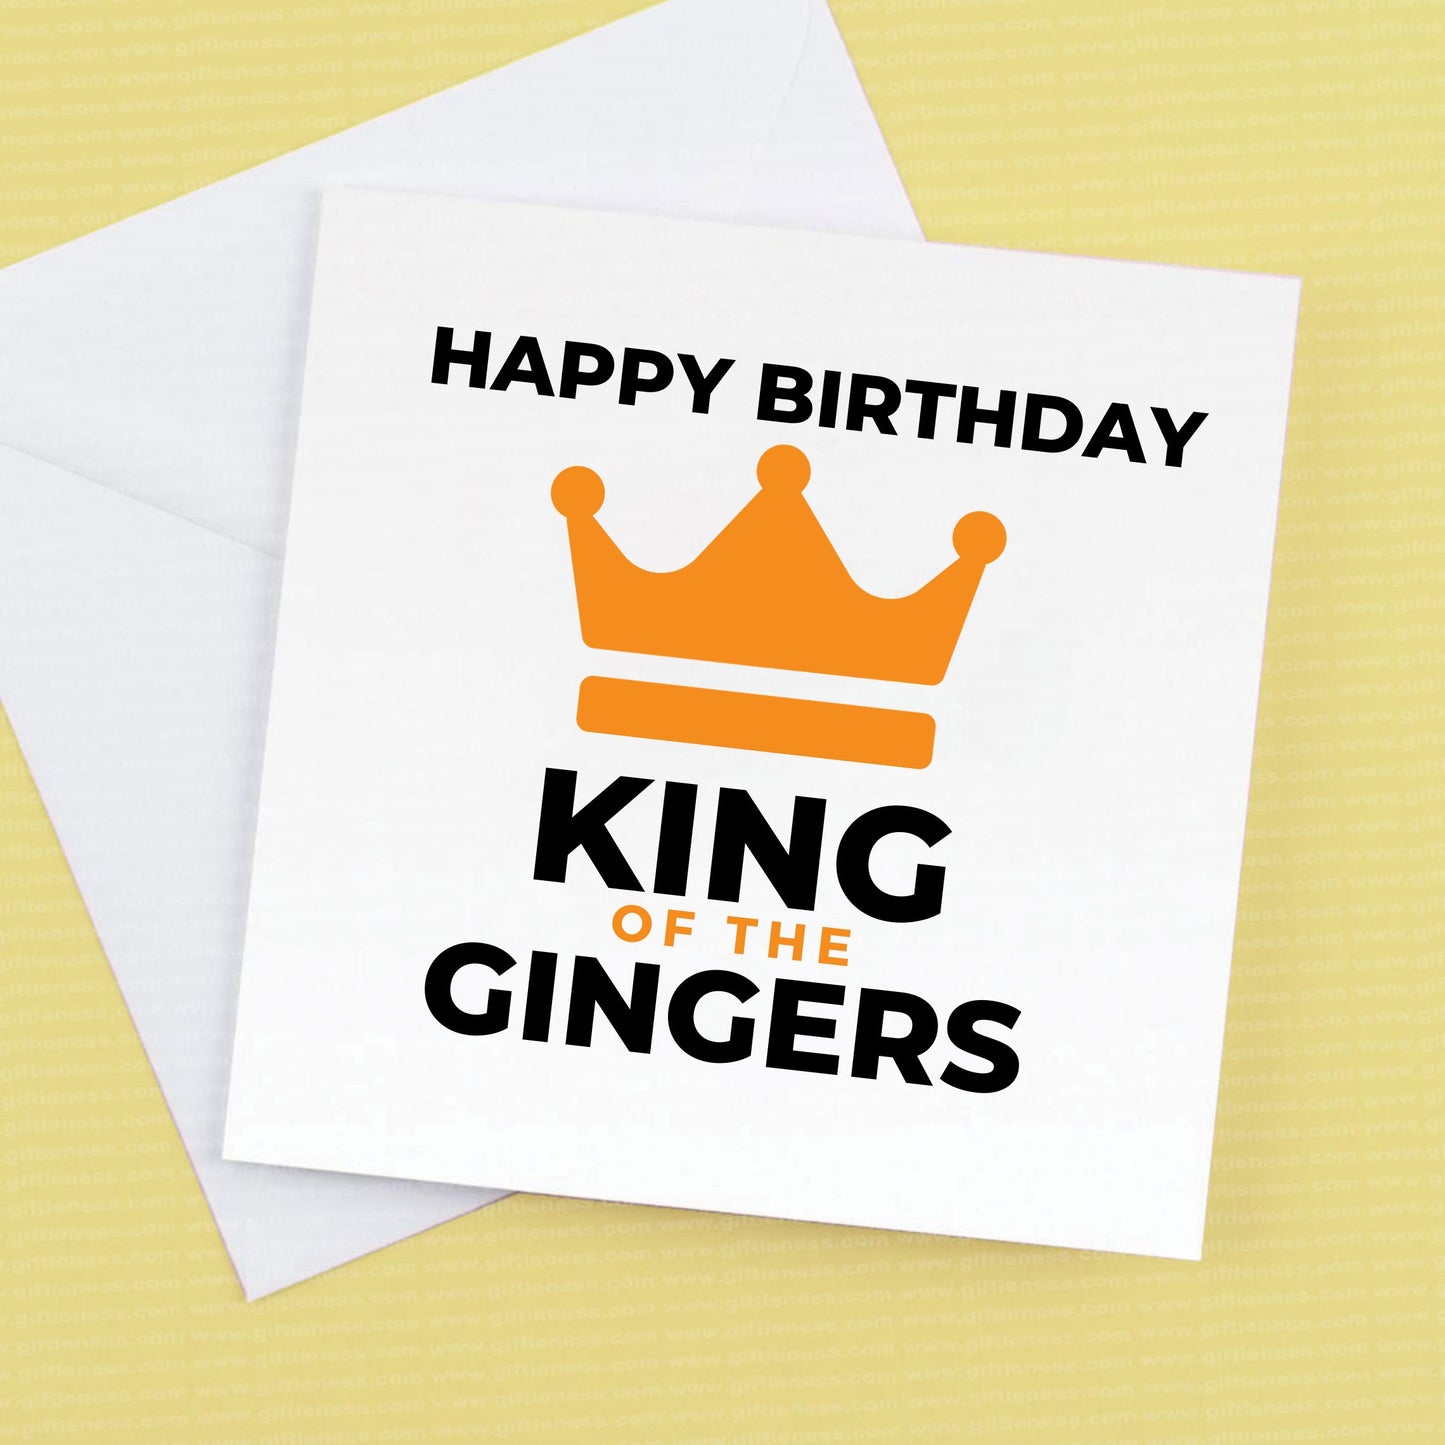 Happy Birthday King of the Gingers, birthday card for your Ginger Mate